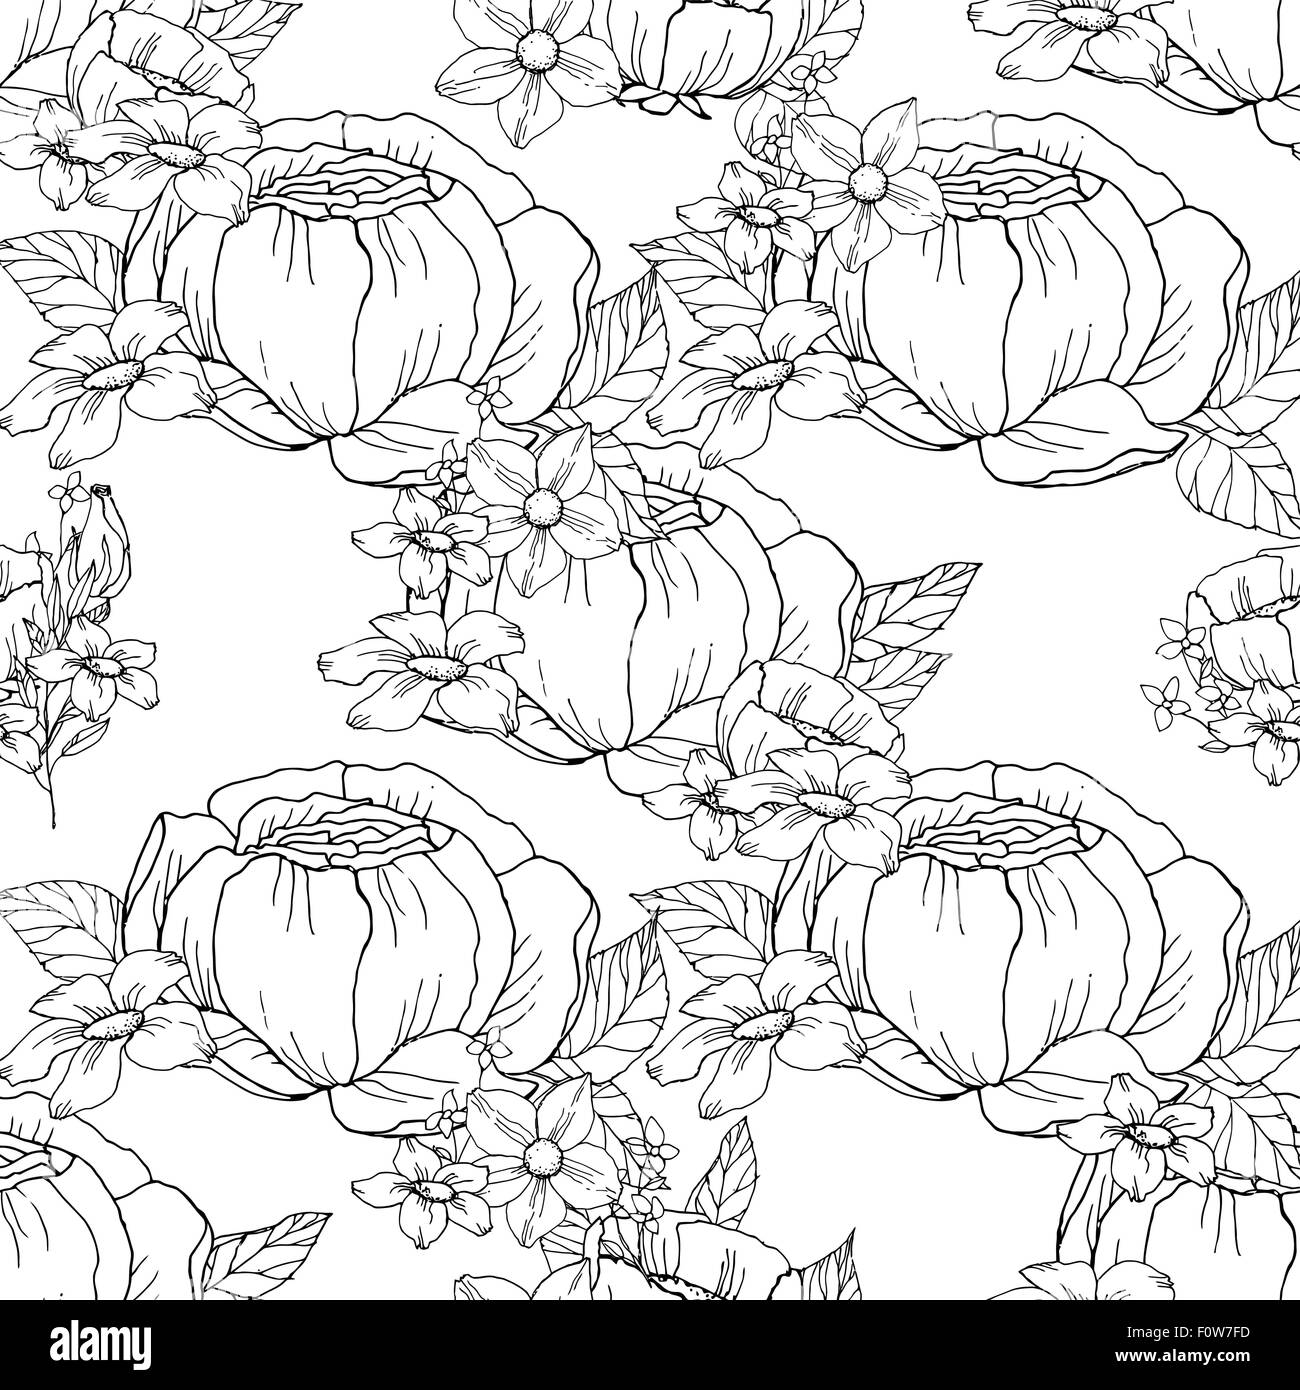 Seamless black and white floral pattern Stock Vector